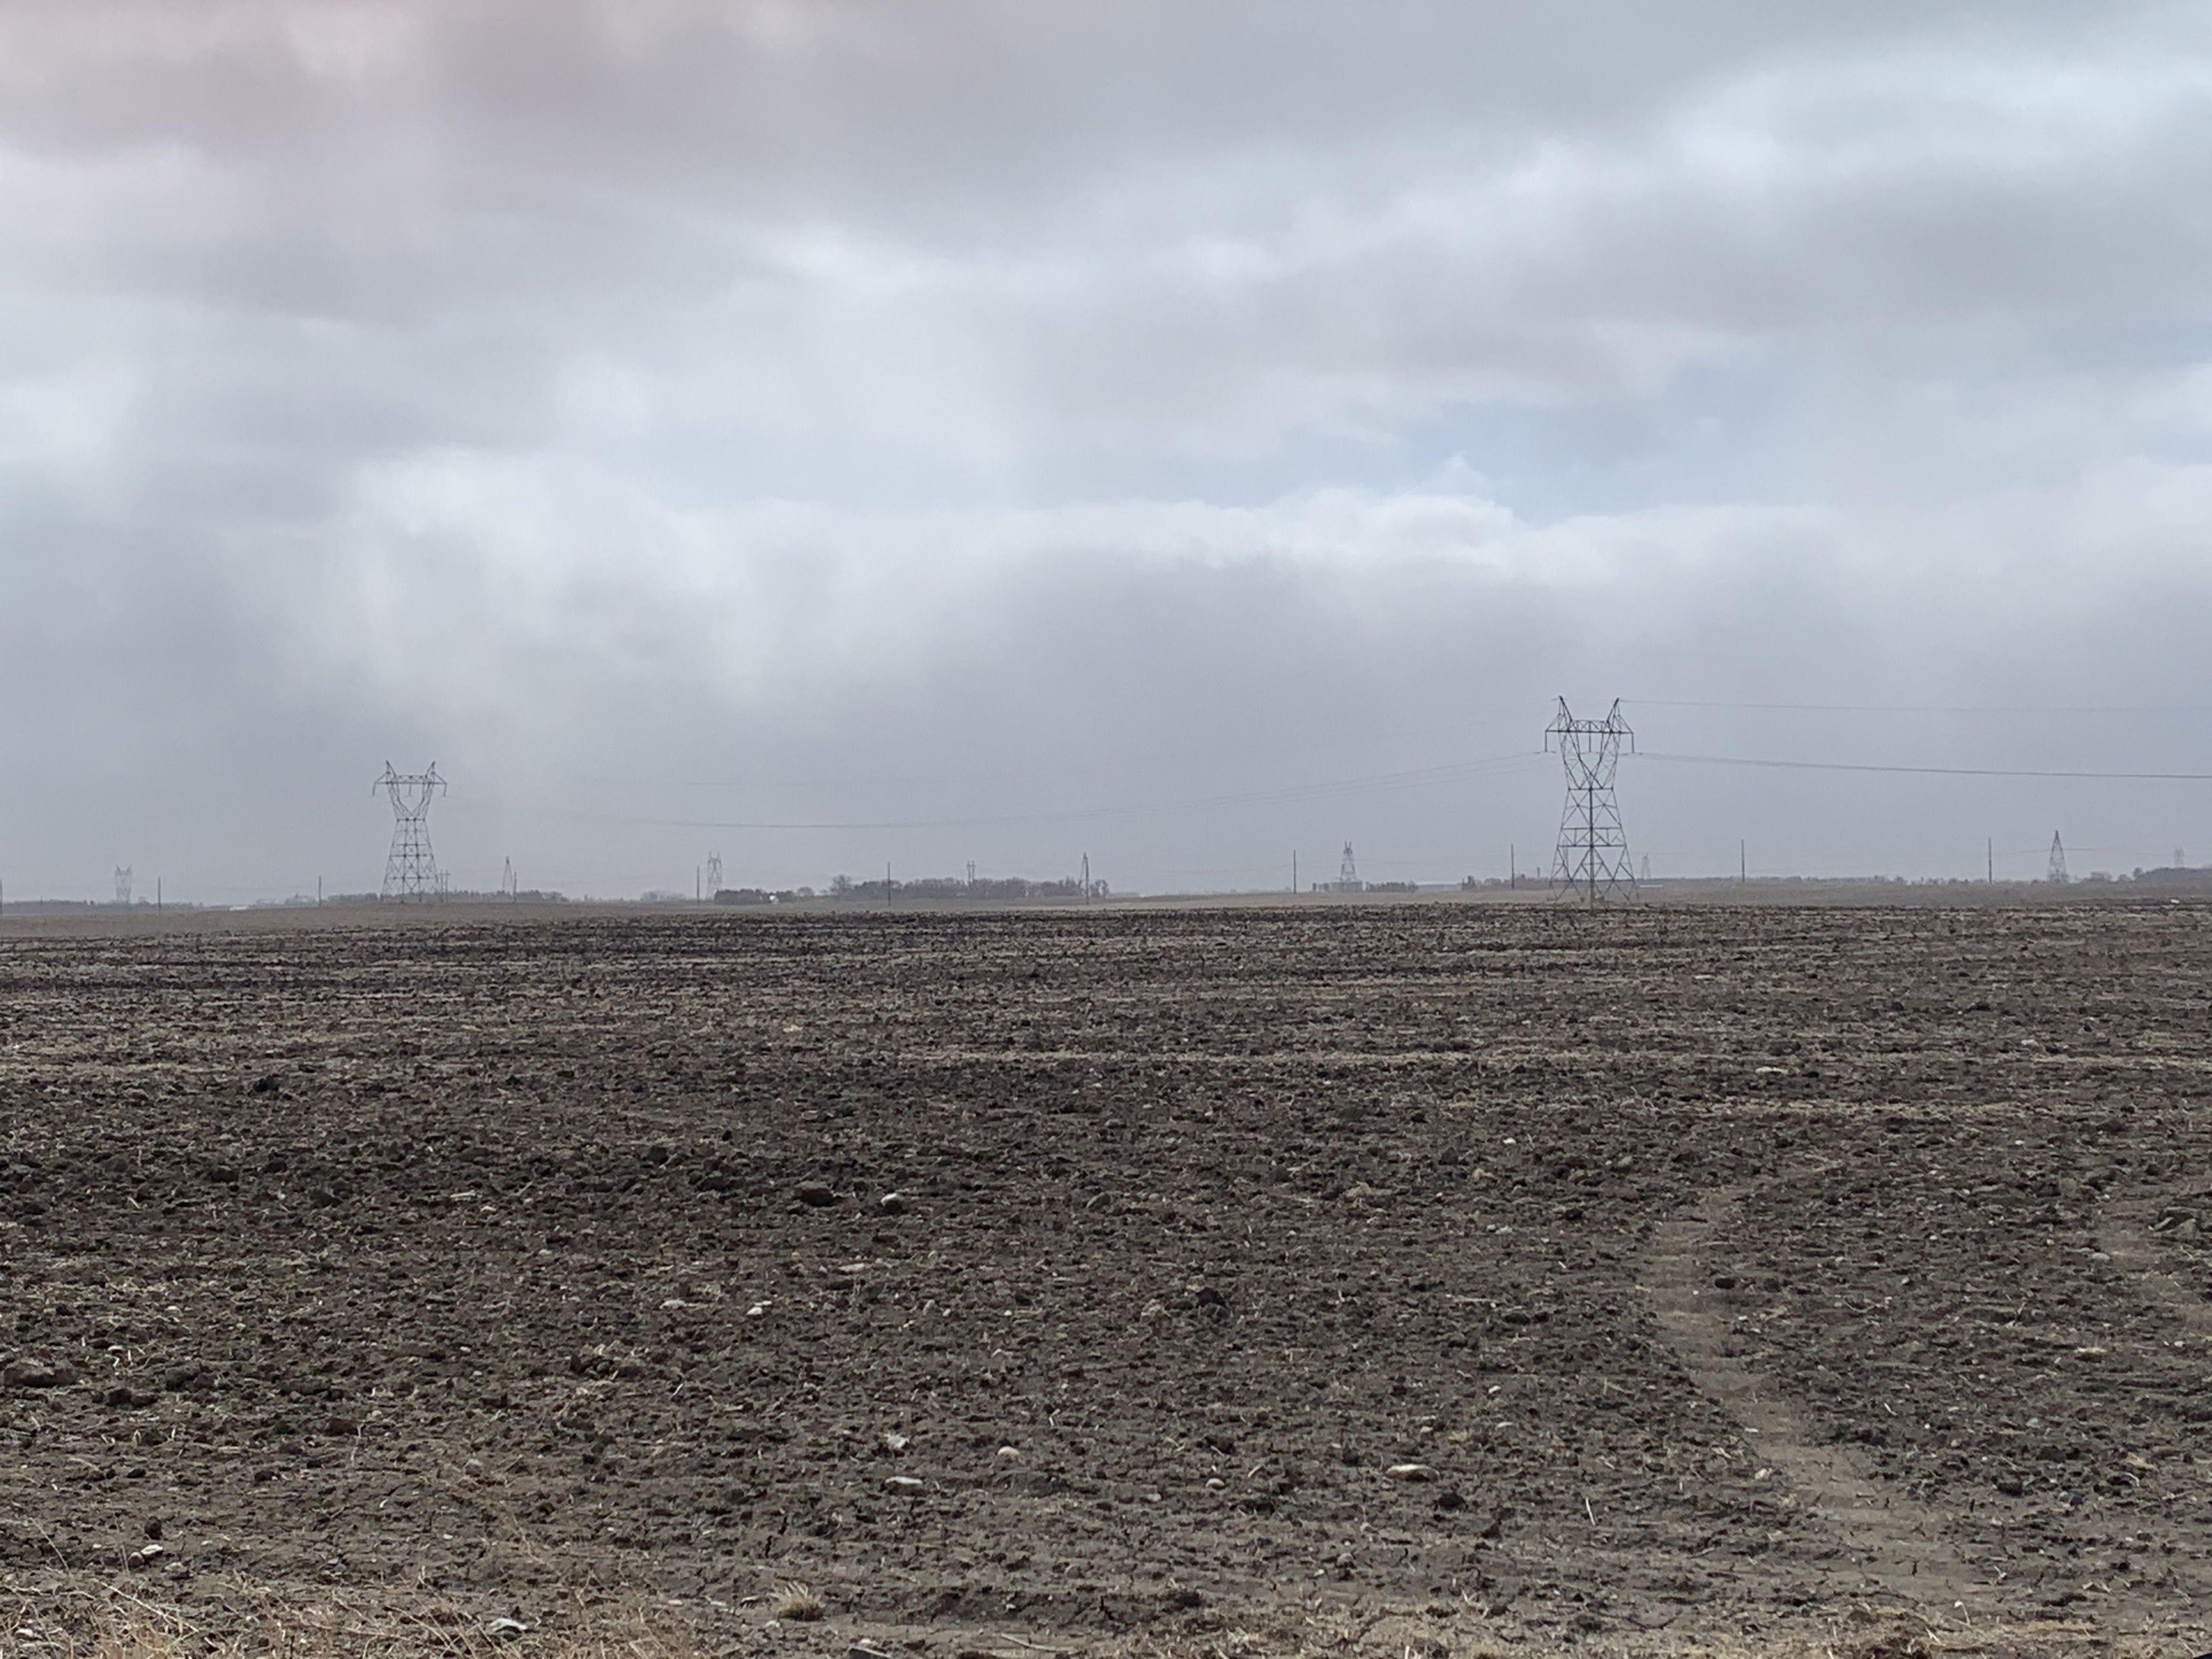 Afternoon Ag News, April 27, 2021: Potato farmer says soil conditions are dry